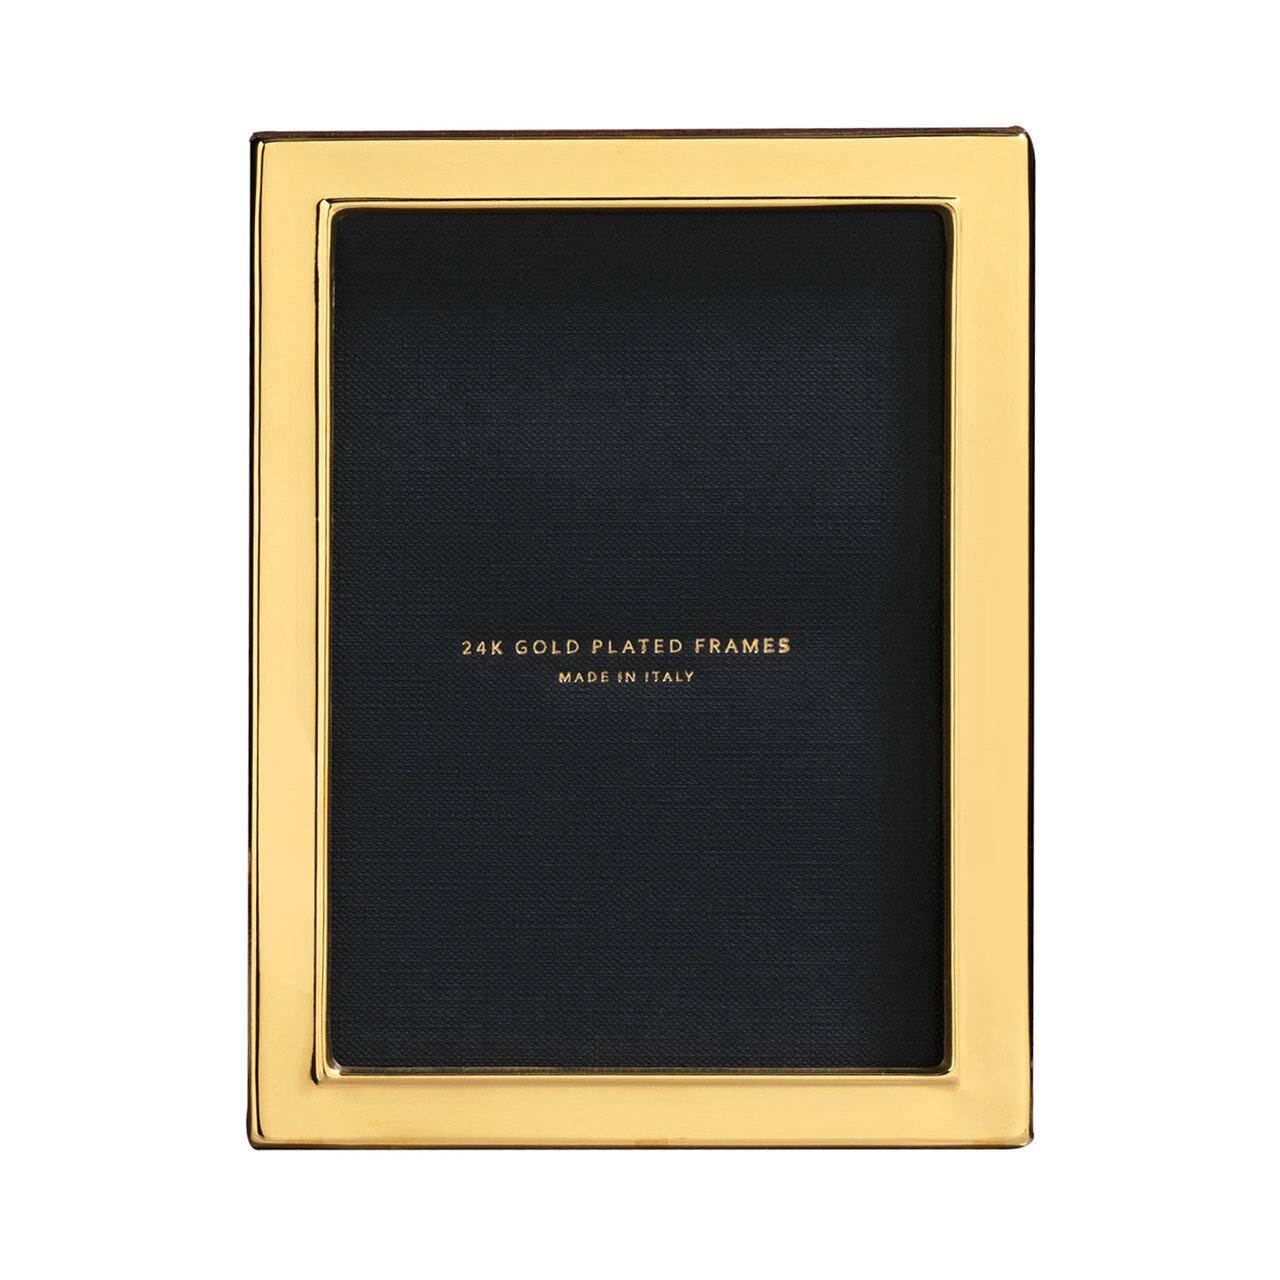 Cunill Plain 1/2 Inch Border 8 x 10 Inch Picture Frame - 24k Gold Plated 0.5 Microns